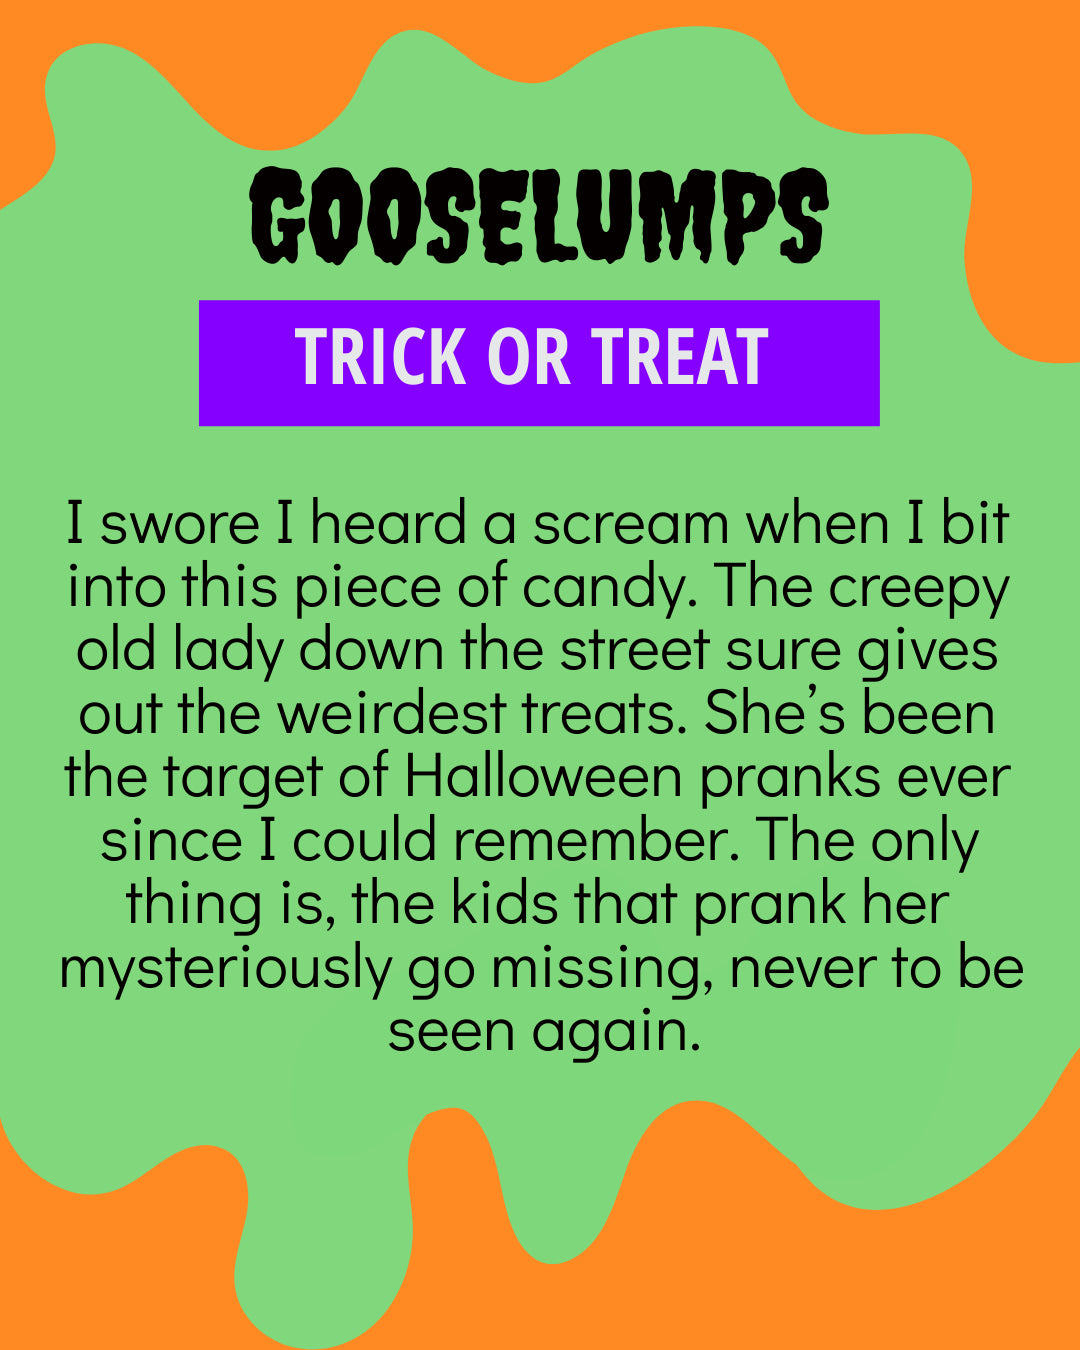 Gooselumps: Trick or Treat (Green and Orange)